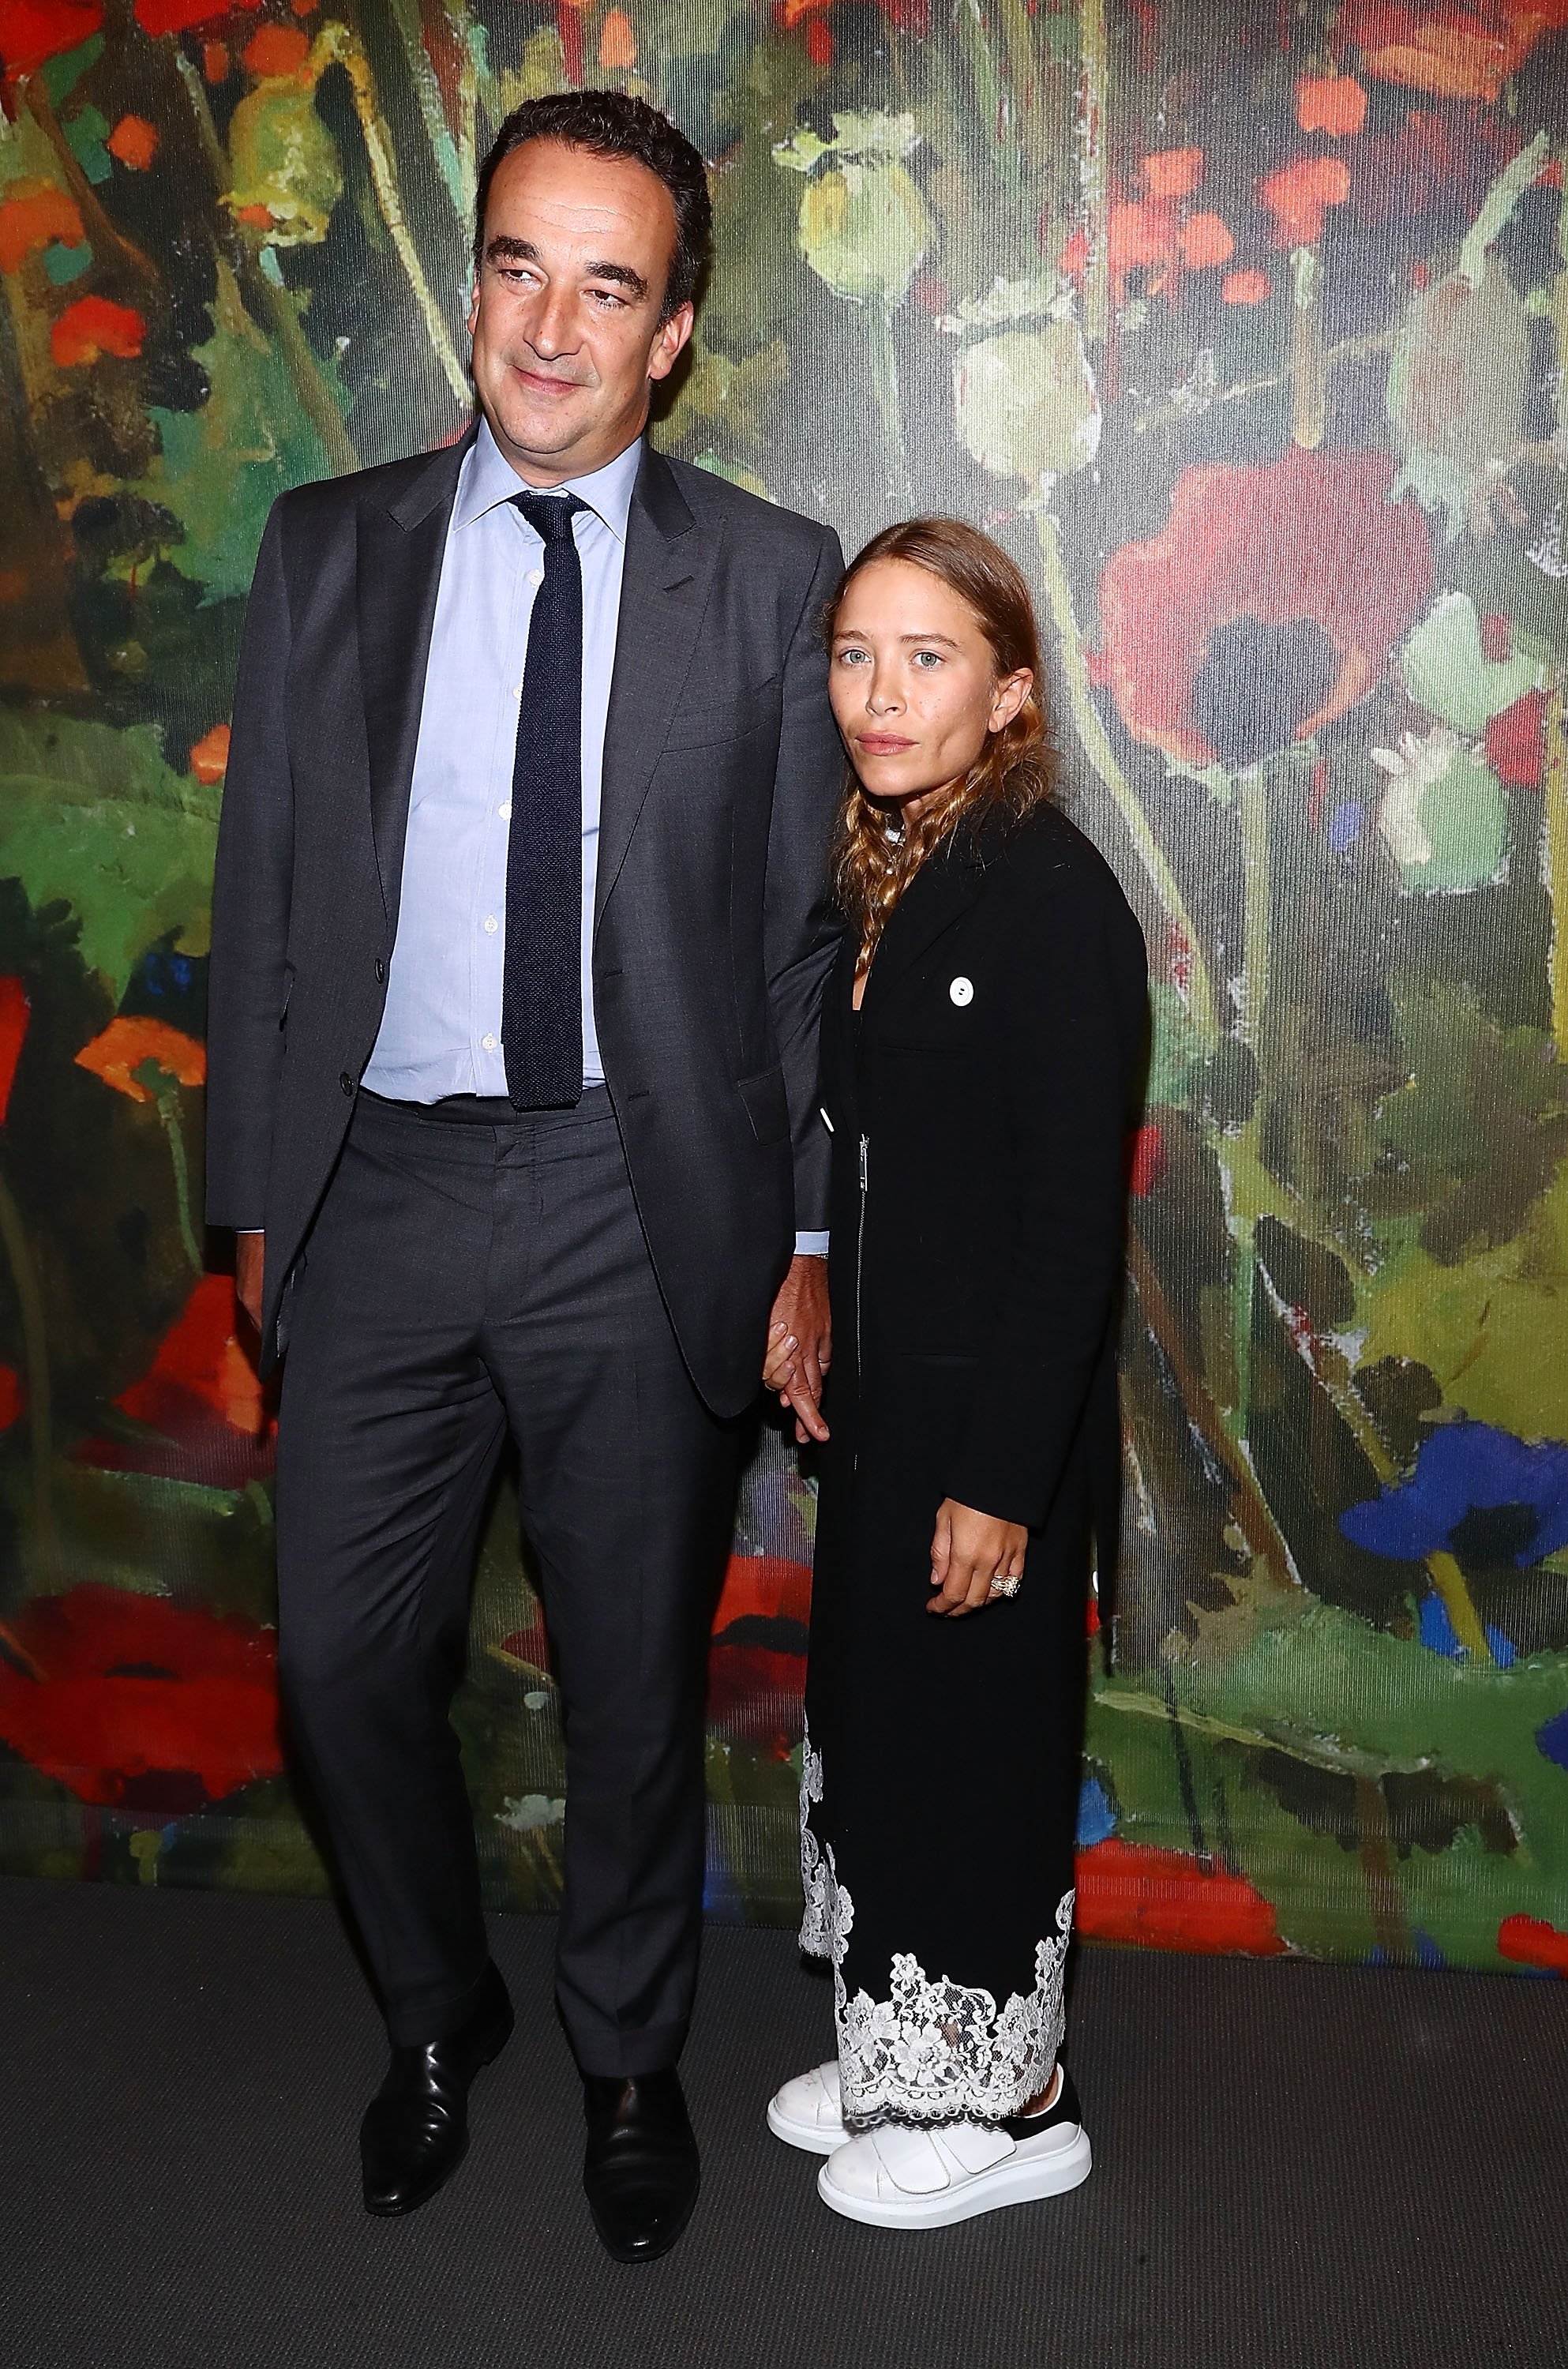 Olivier Sarkozy and Mary-Kate Olsen during 2017 Take Home A Nude Art party and auction at Sotheby's on October 11, 2017 in New York City. / Source: Getty Images